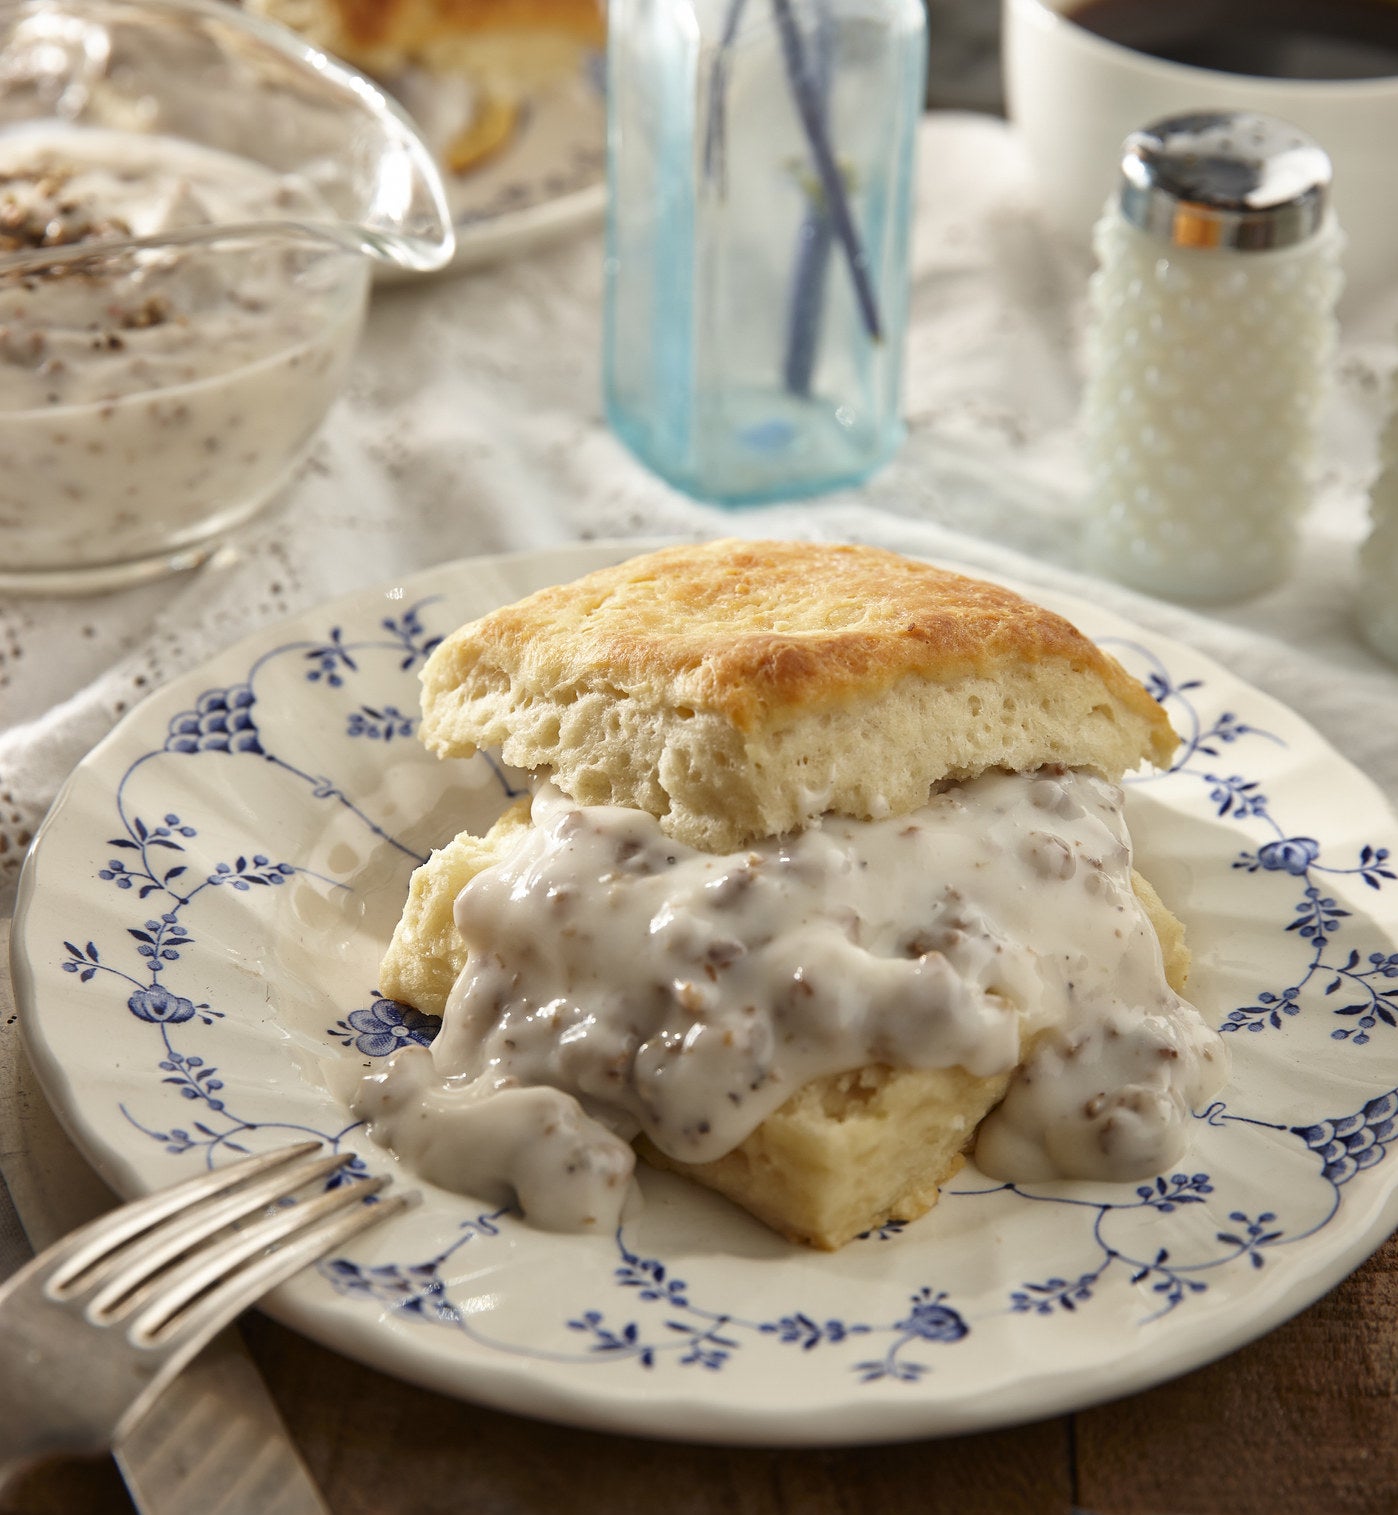 Homemade biscuits and gravy with coffee